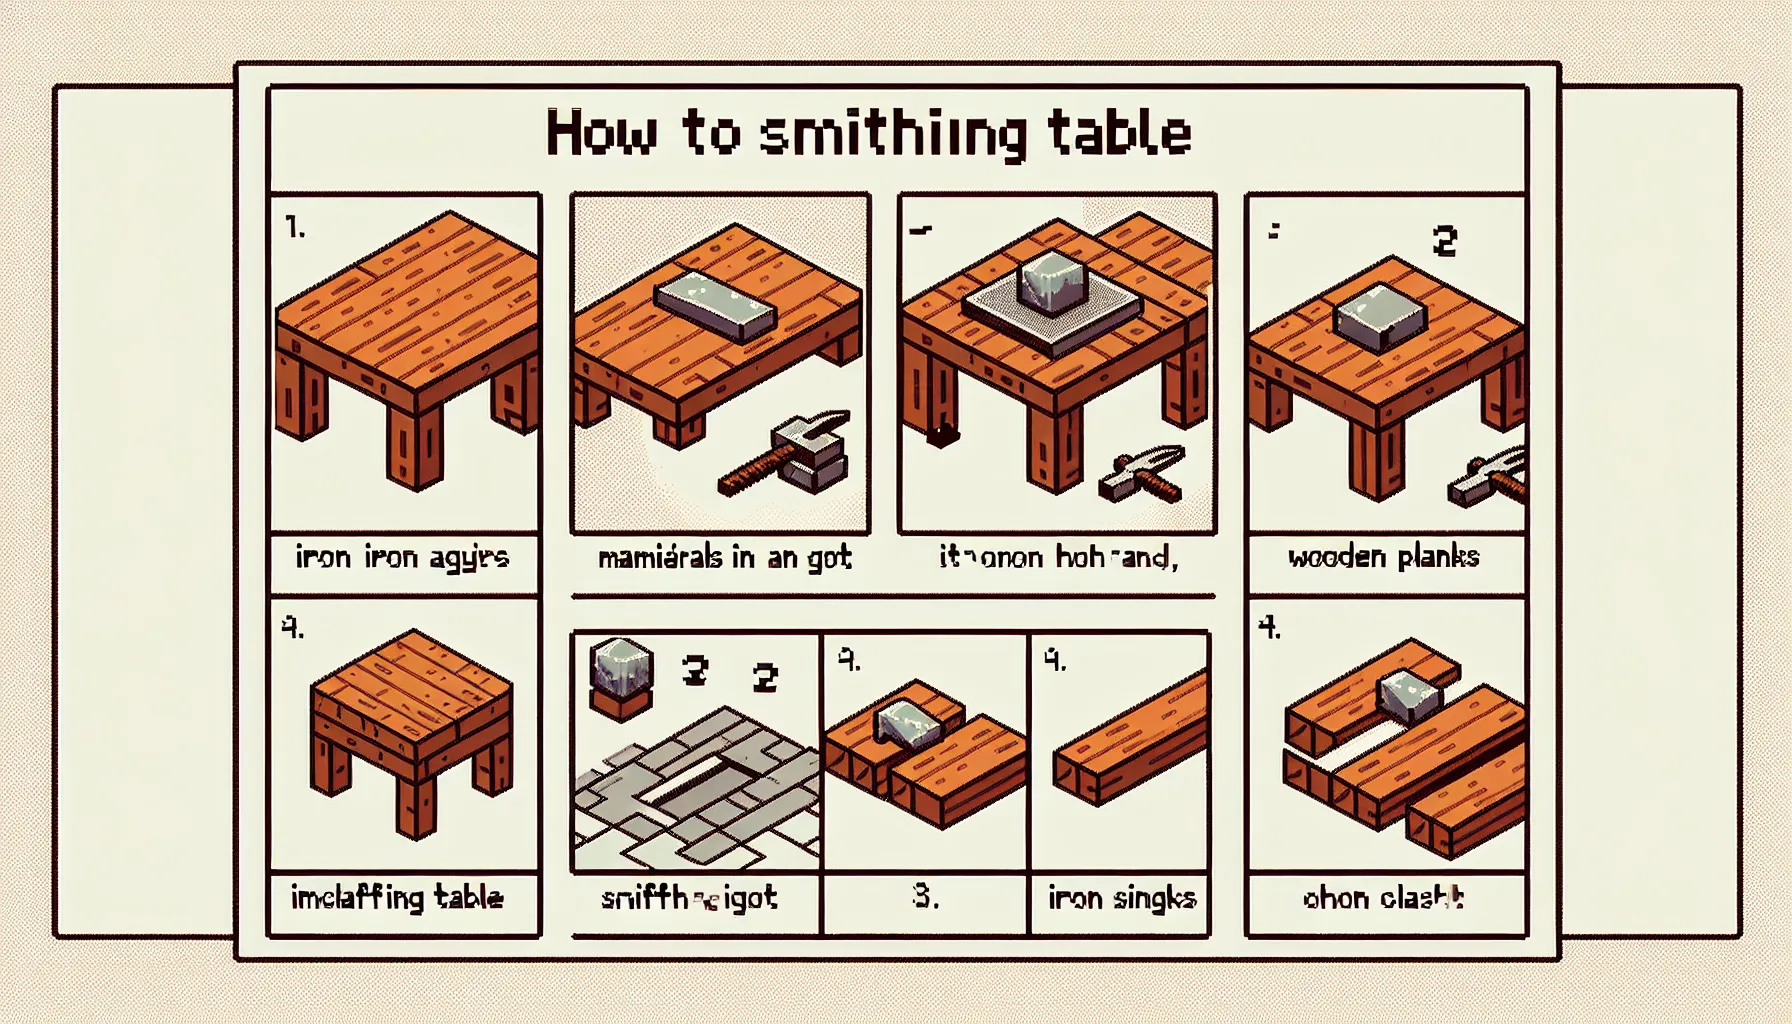 How to Make a Smithing Table in Minecraft - Complete Guide